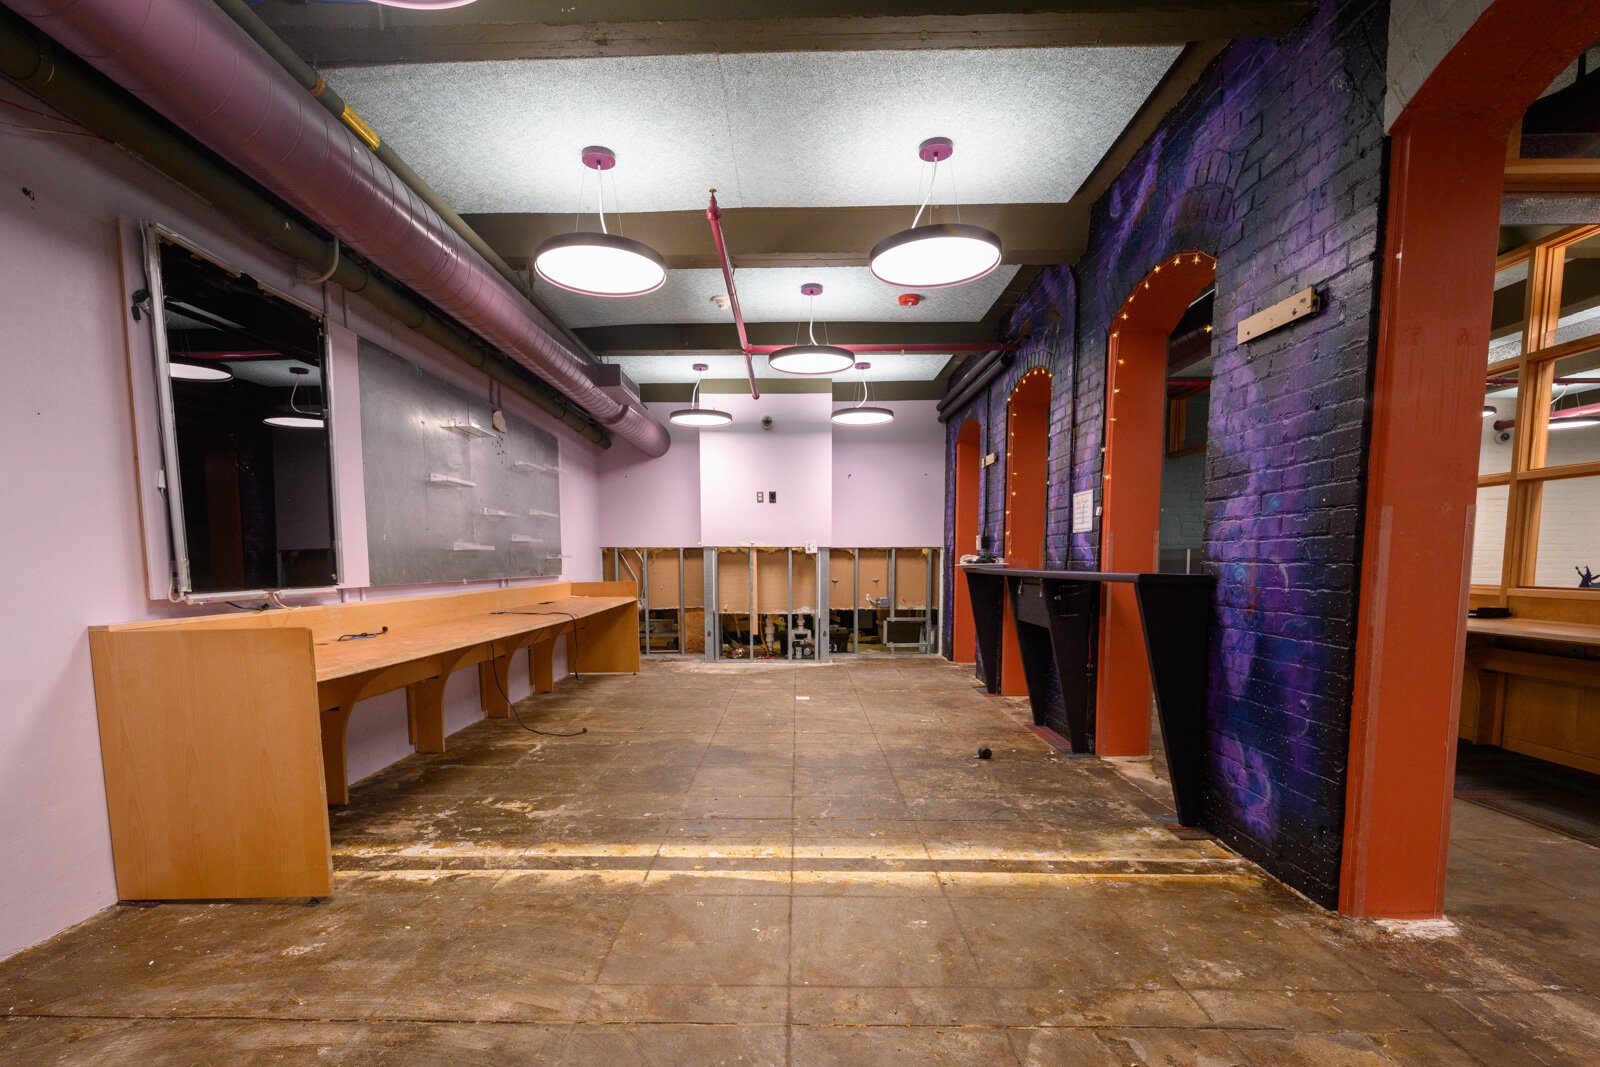 The basement of the YDL Michigan Avenue branch during remediation.